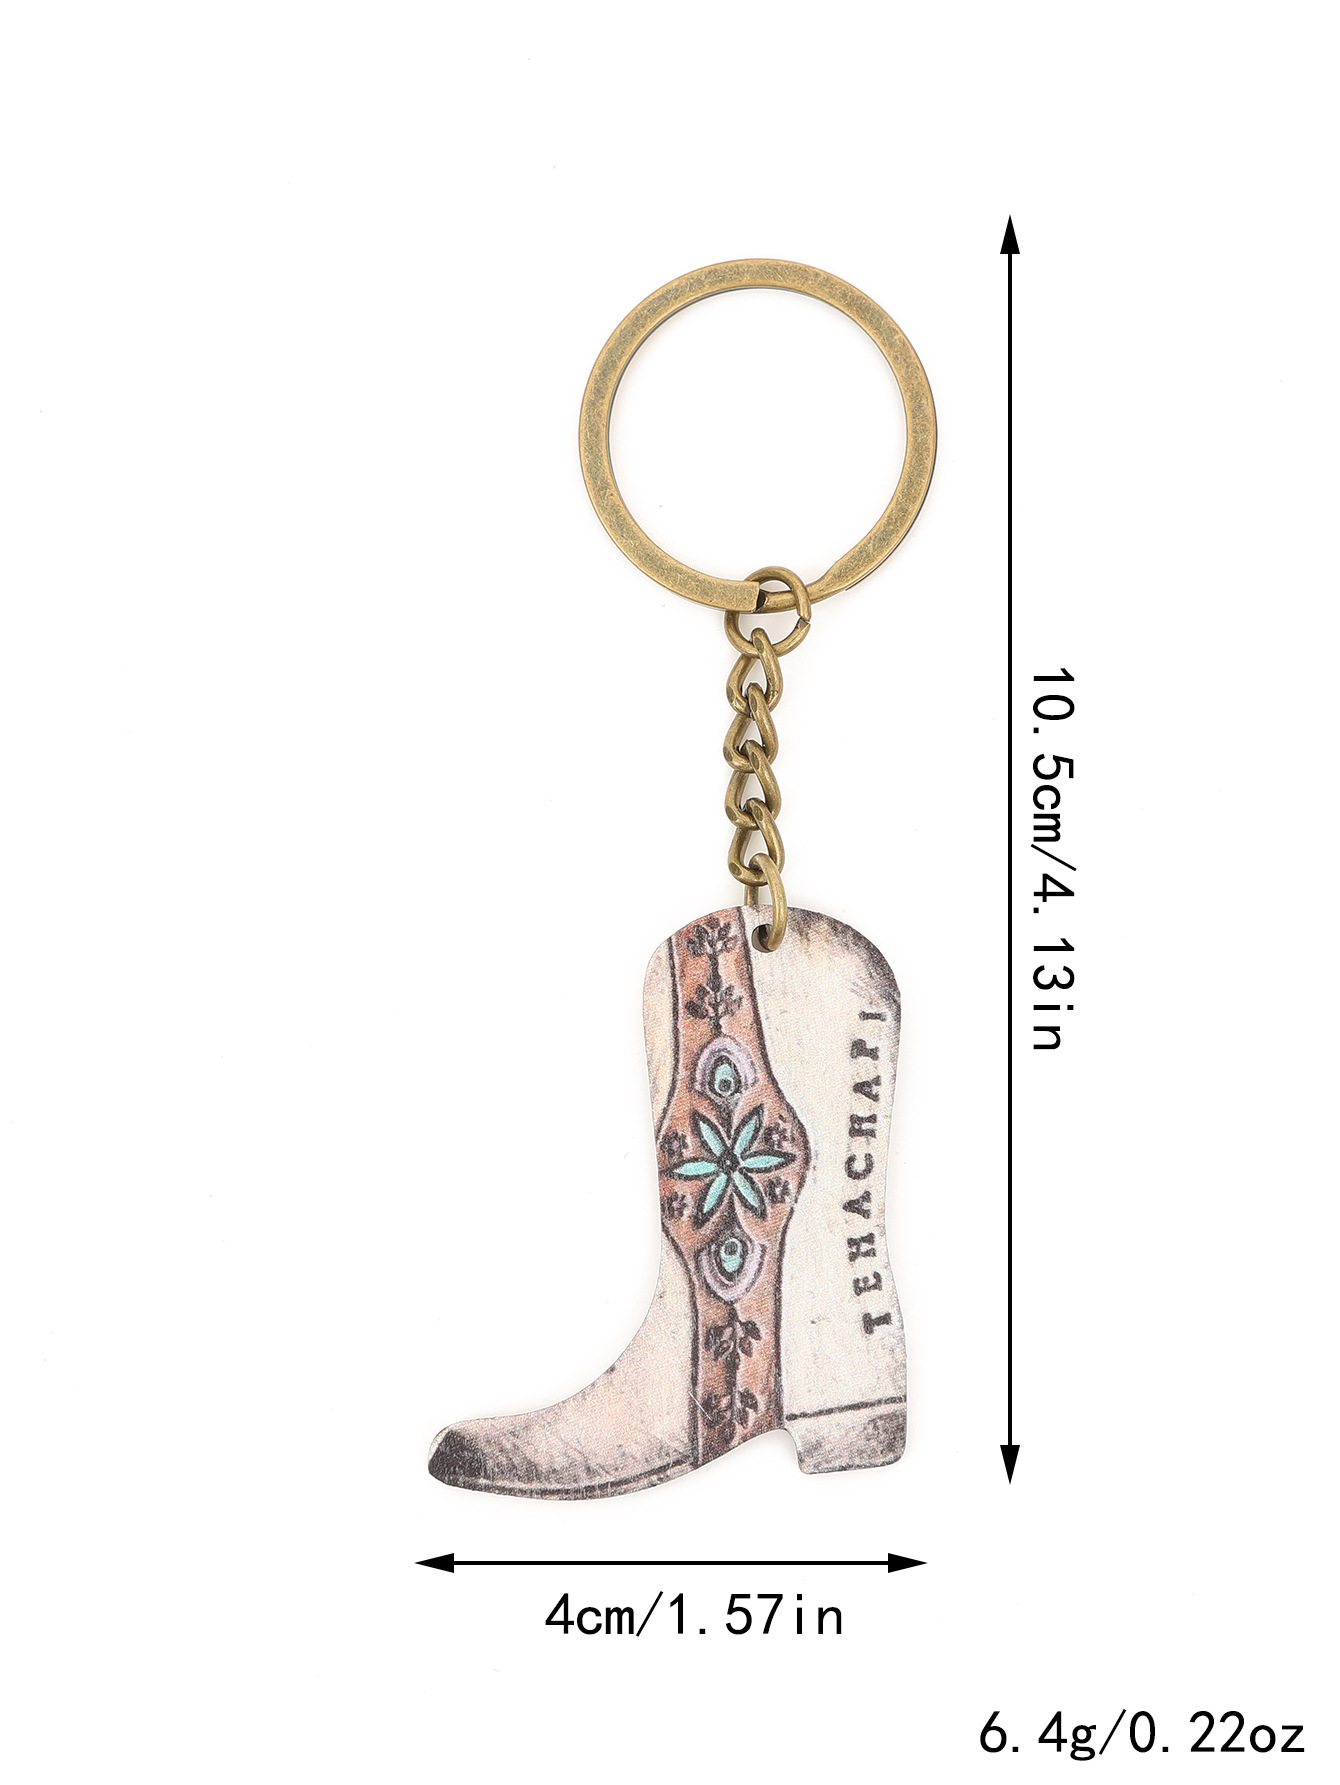 Cross-Border Western Style Boots Keychain Cars and Bags Pendant AliExpress European and American Amazon